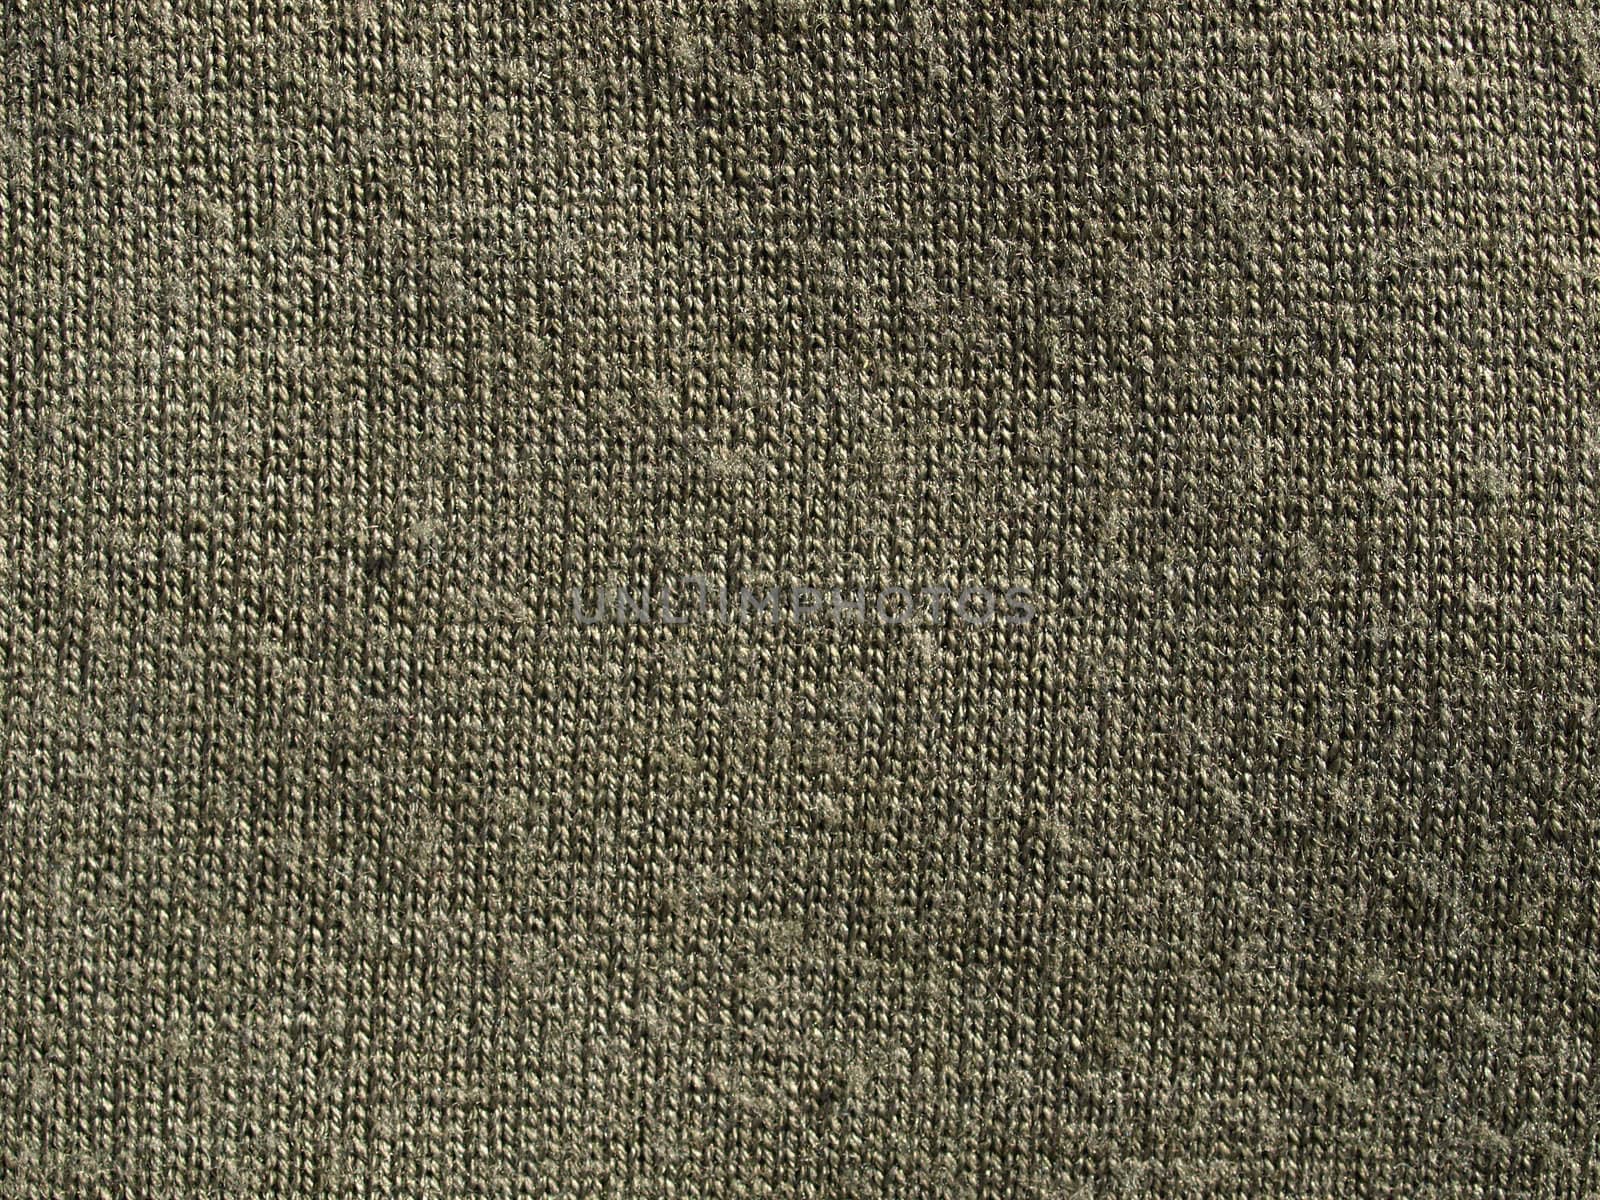 Background of textile material fabric texture pattern